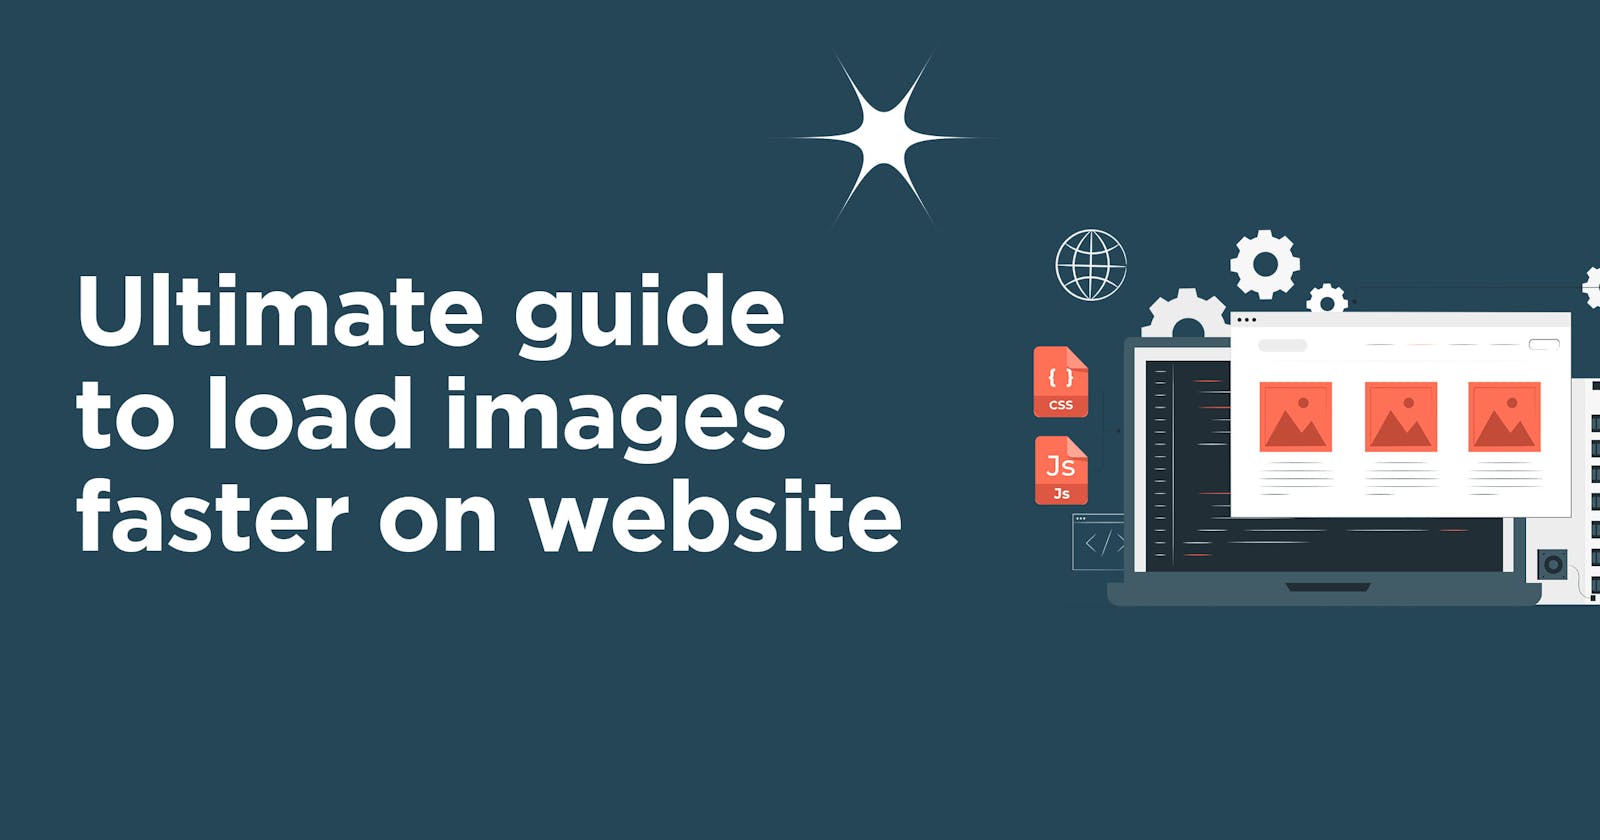 The ultimate Guide to make images load faster on website